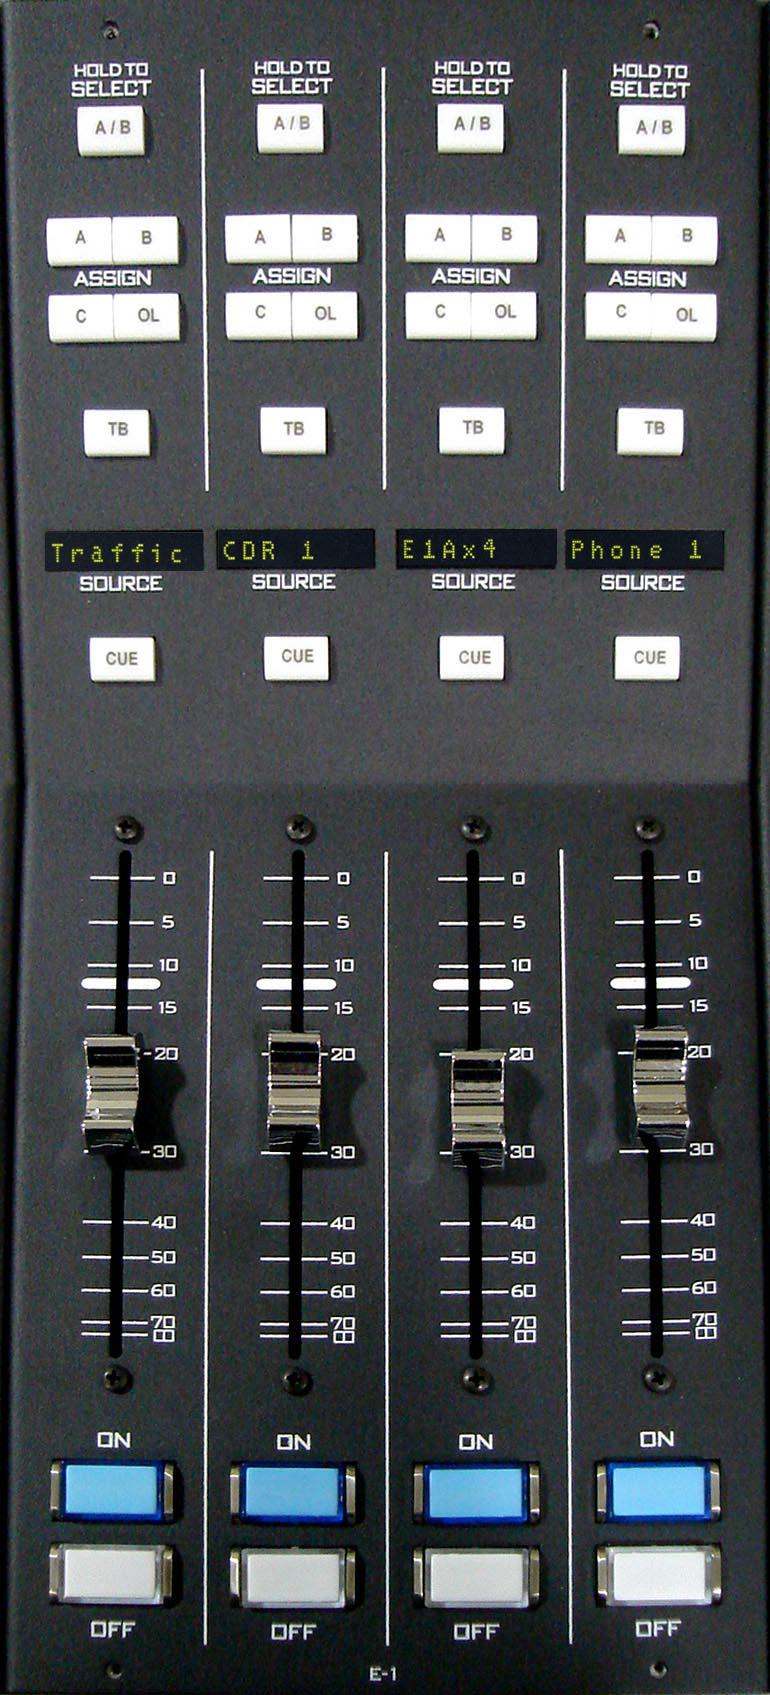 Controls and Functions INPUT PANEL Input Panel (IPE-1) Each input panel of the E-1 digital audio control surface has four identical strips representing four input channels.